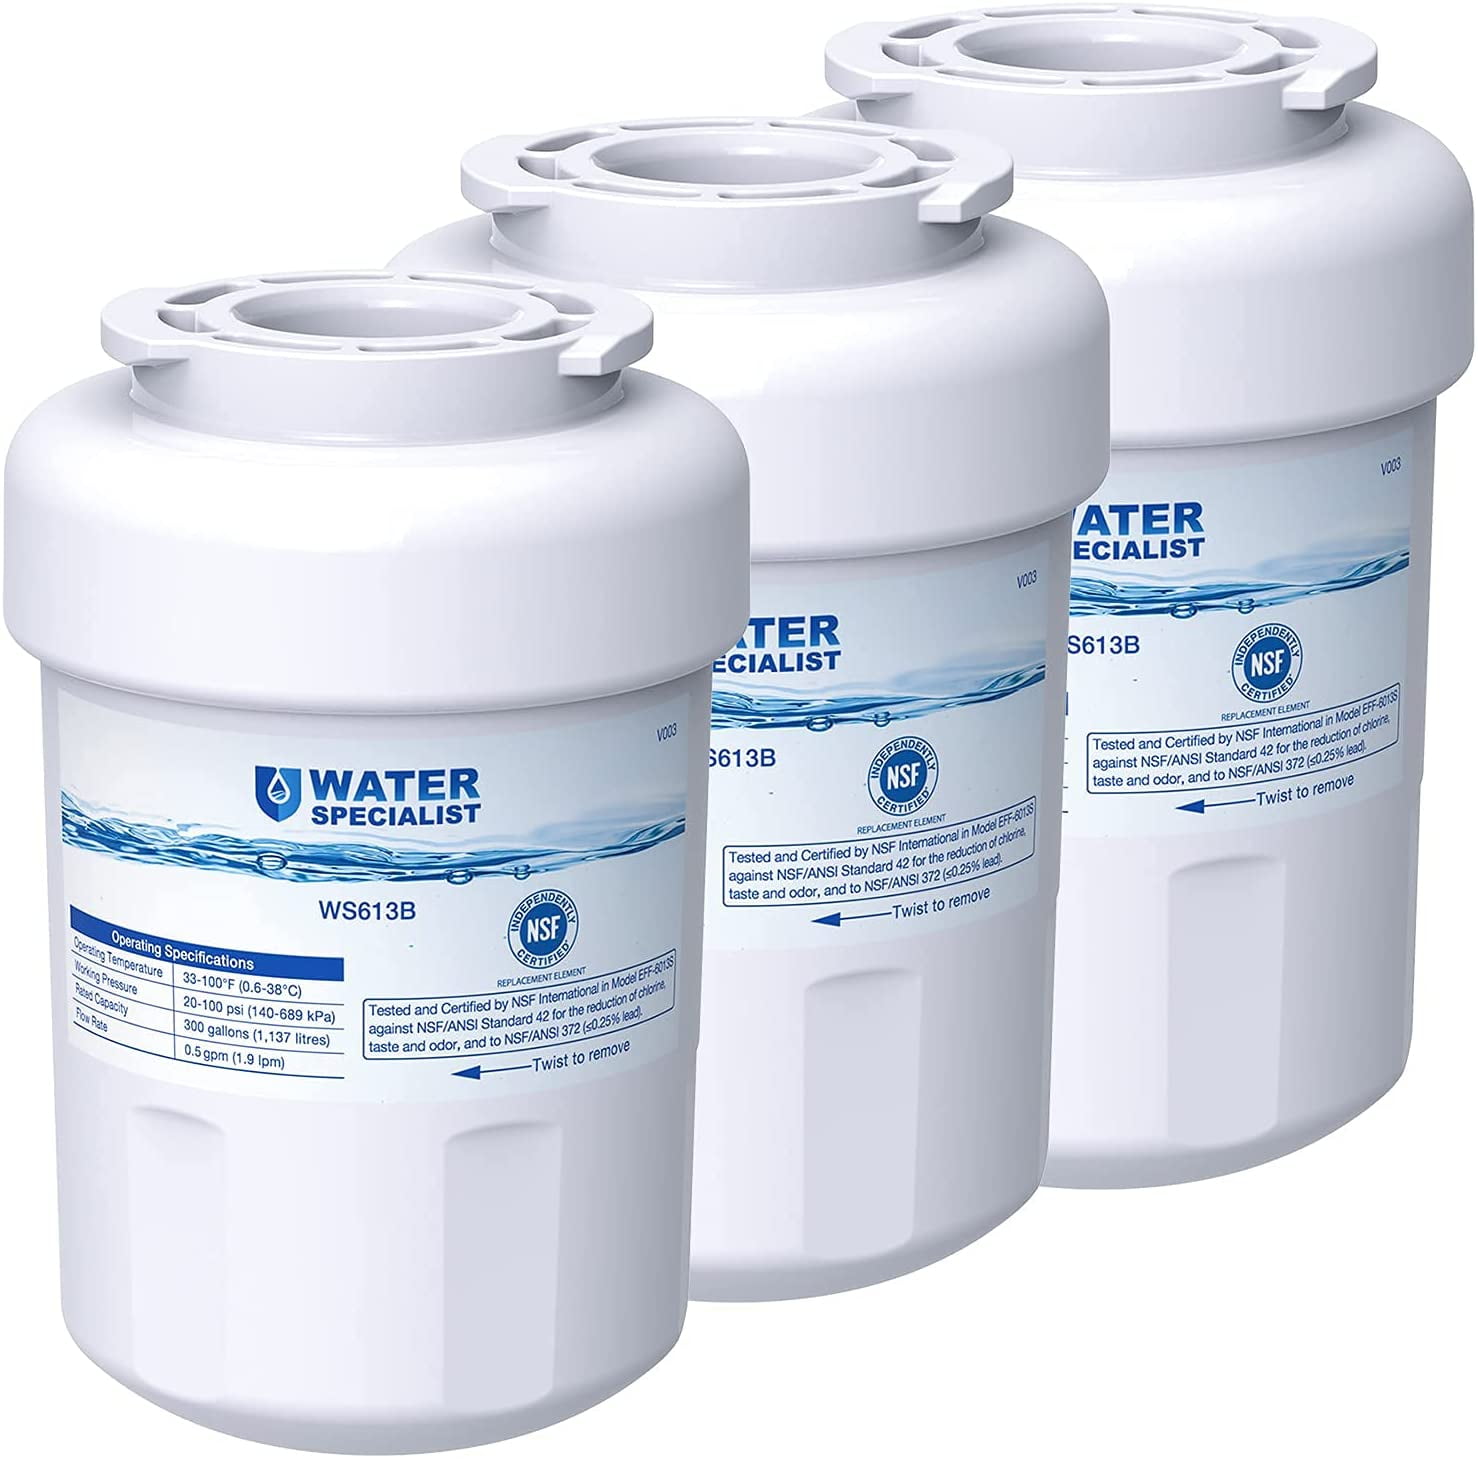 Waterspecialist MWF Refrigerator Water Filter, Replacement for GE® Smart  Water MWFP , MWFA, GWF, HDX FMG-1, WFC1201, GSE25GSHECSS, PC75009, RWF1060,  3 Filters - Walmart.com